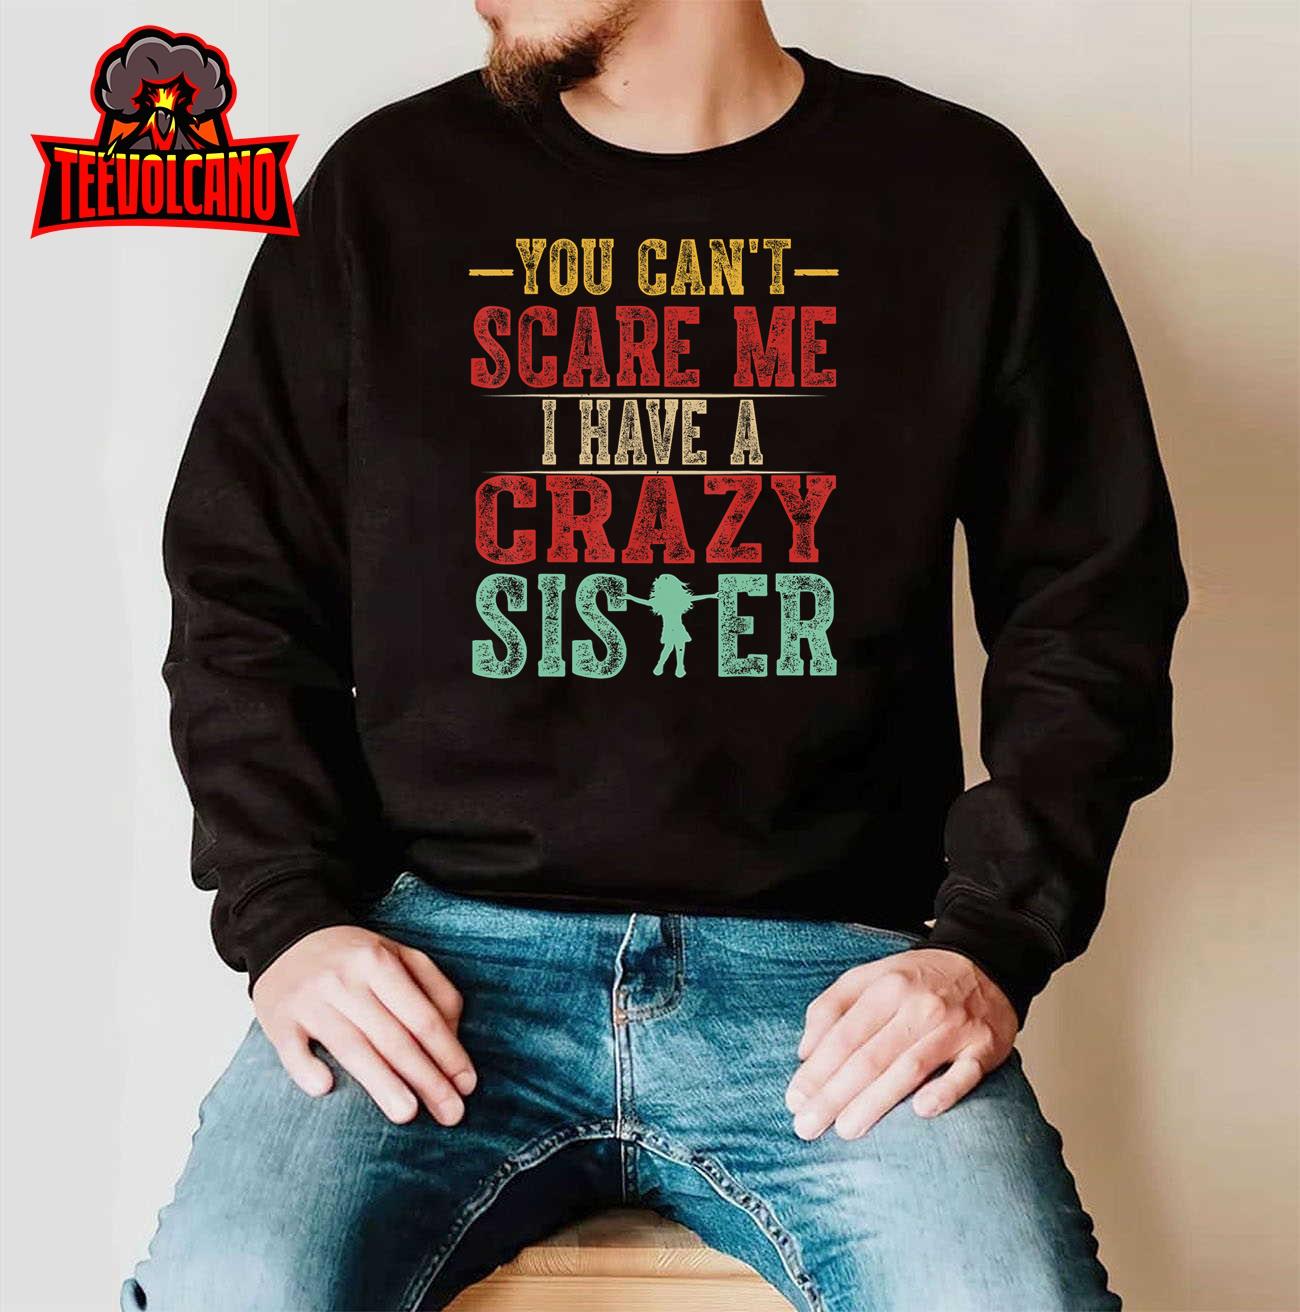 You Can’t Scare Me I Have A Crazy Sister, Funny Brother Gift T-Shirt